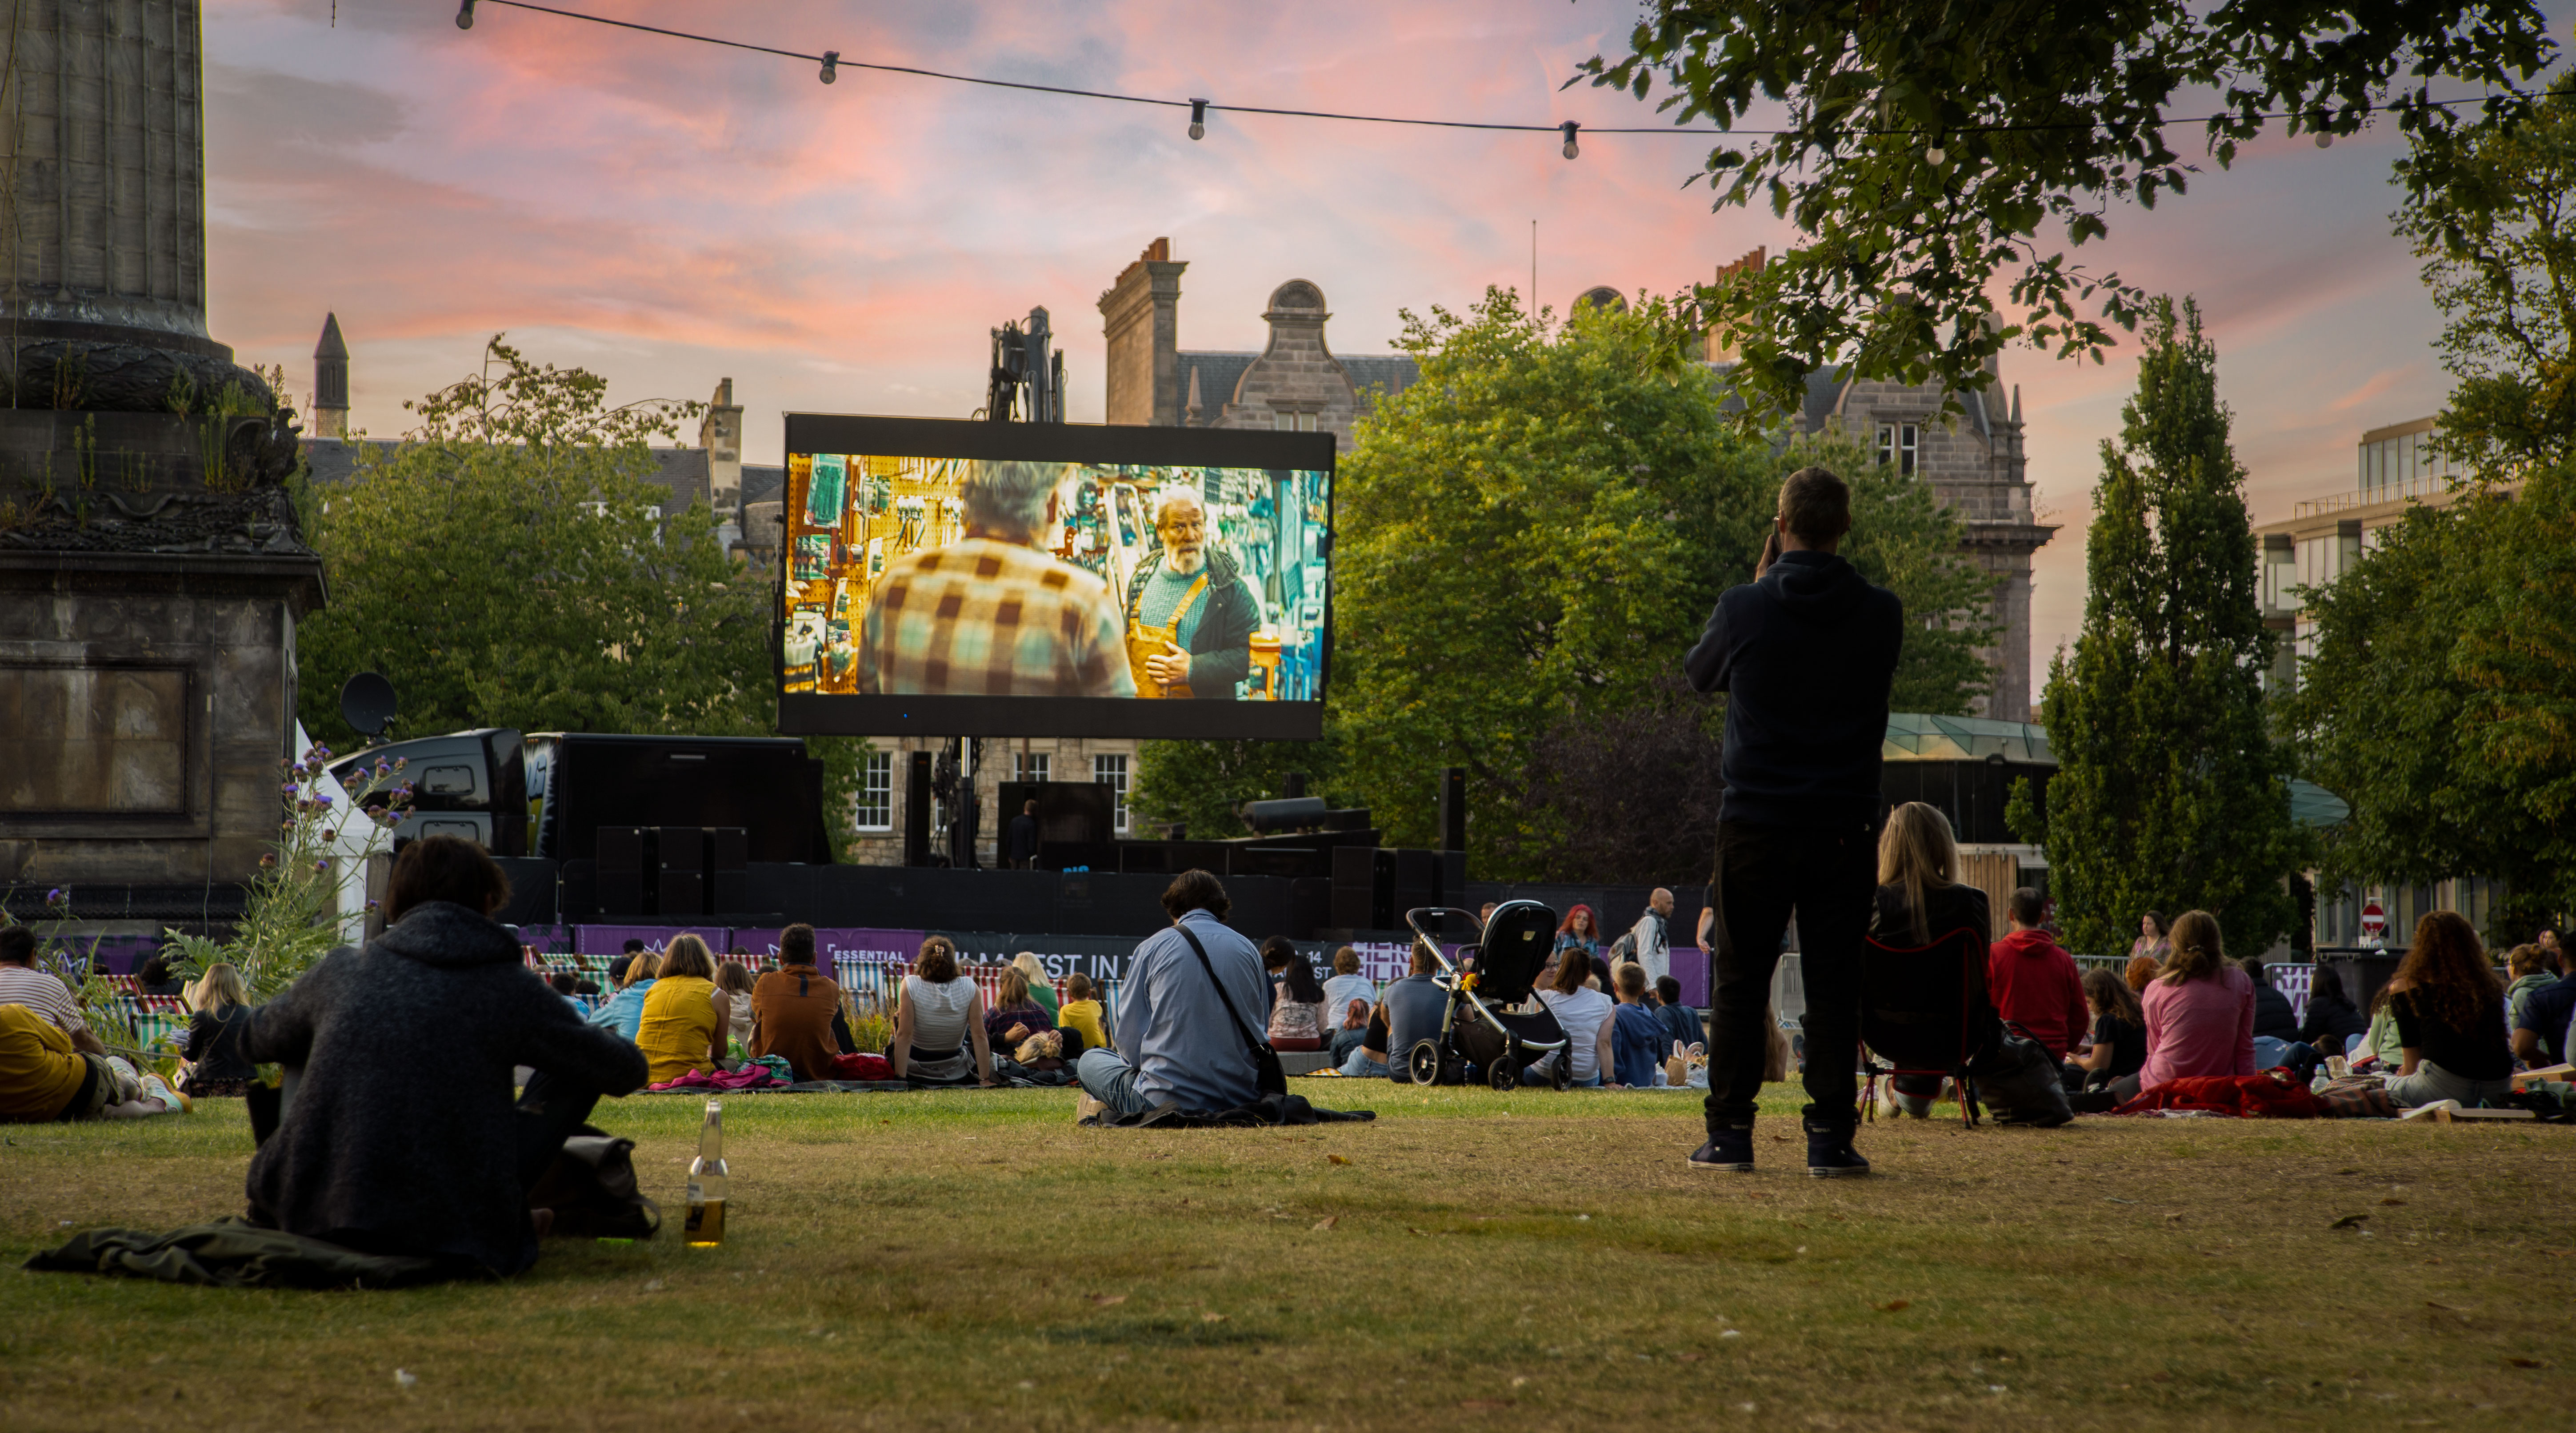 large film screen in front of an audience in public park